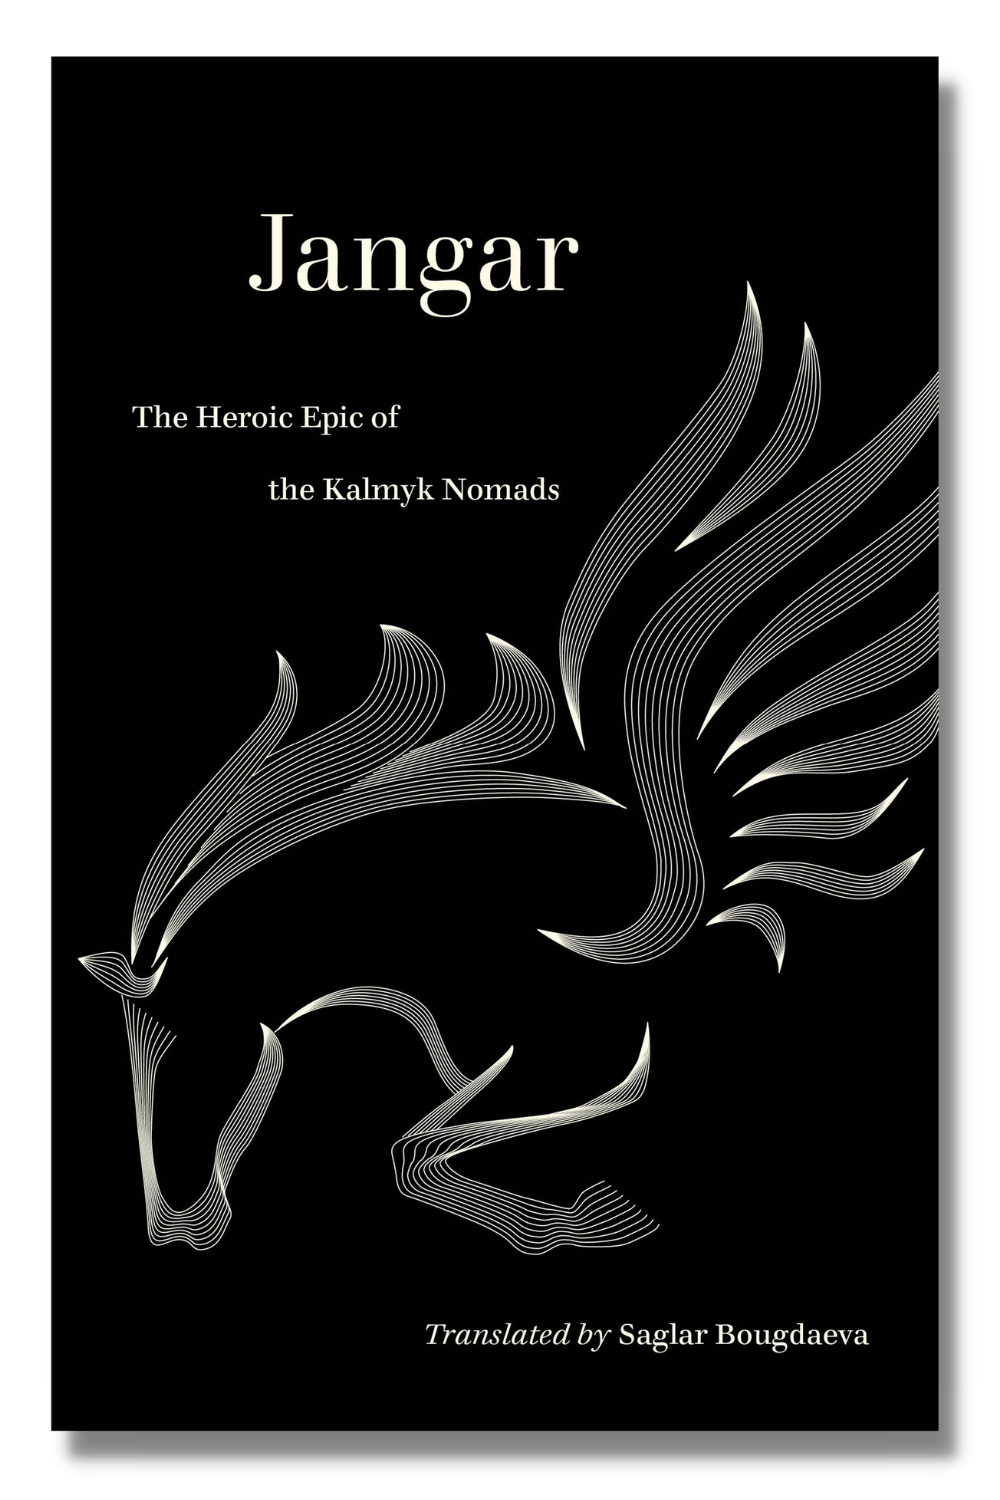 The cover of "Jangar"